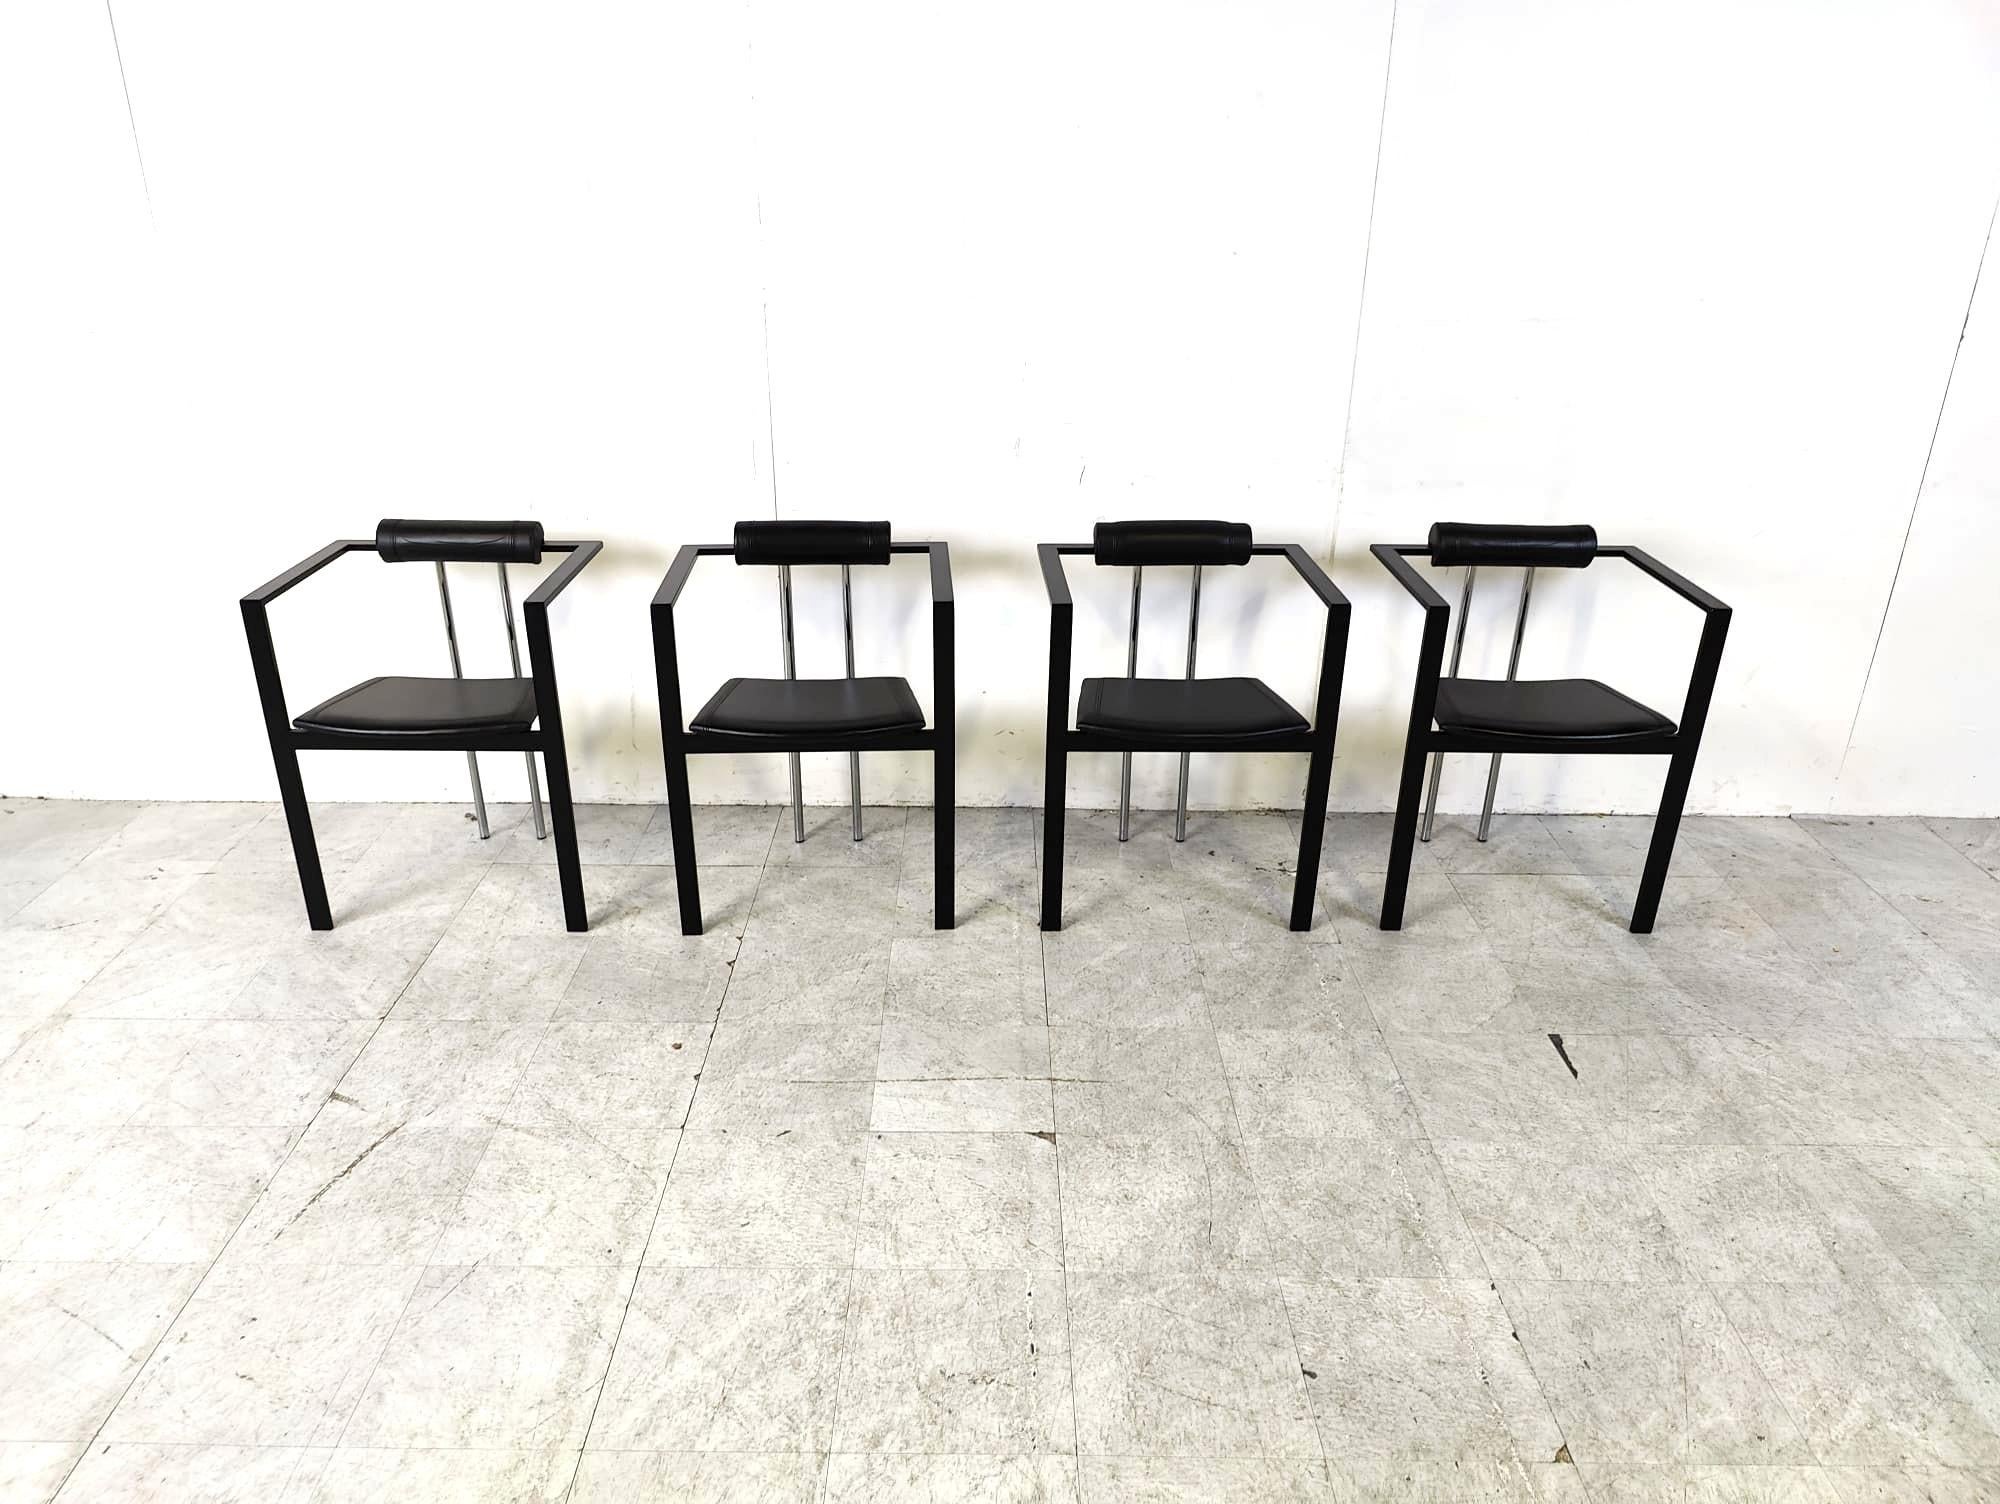 Vintage 'trix' dining chairs by Karl Friedrich Förster for Kff for KFF Germany with a cool memphis style design.

Chromed and black metal frame and black leatehrette upholstery.

Timeless design, very good condition

1980s -